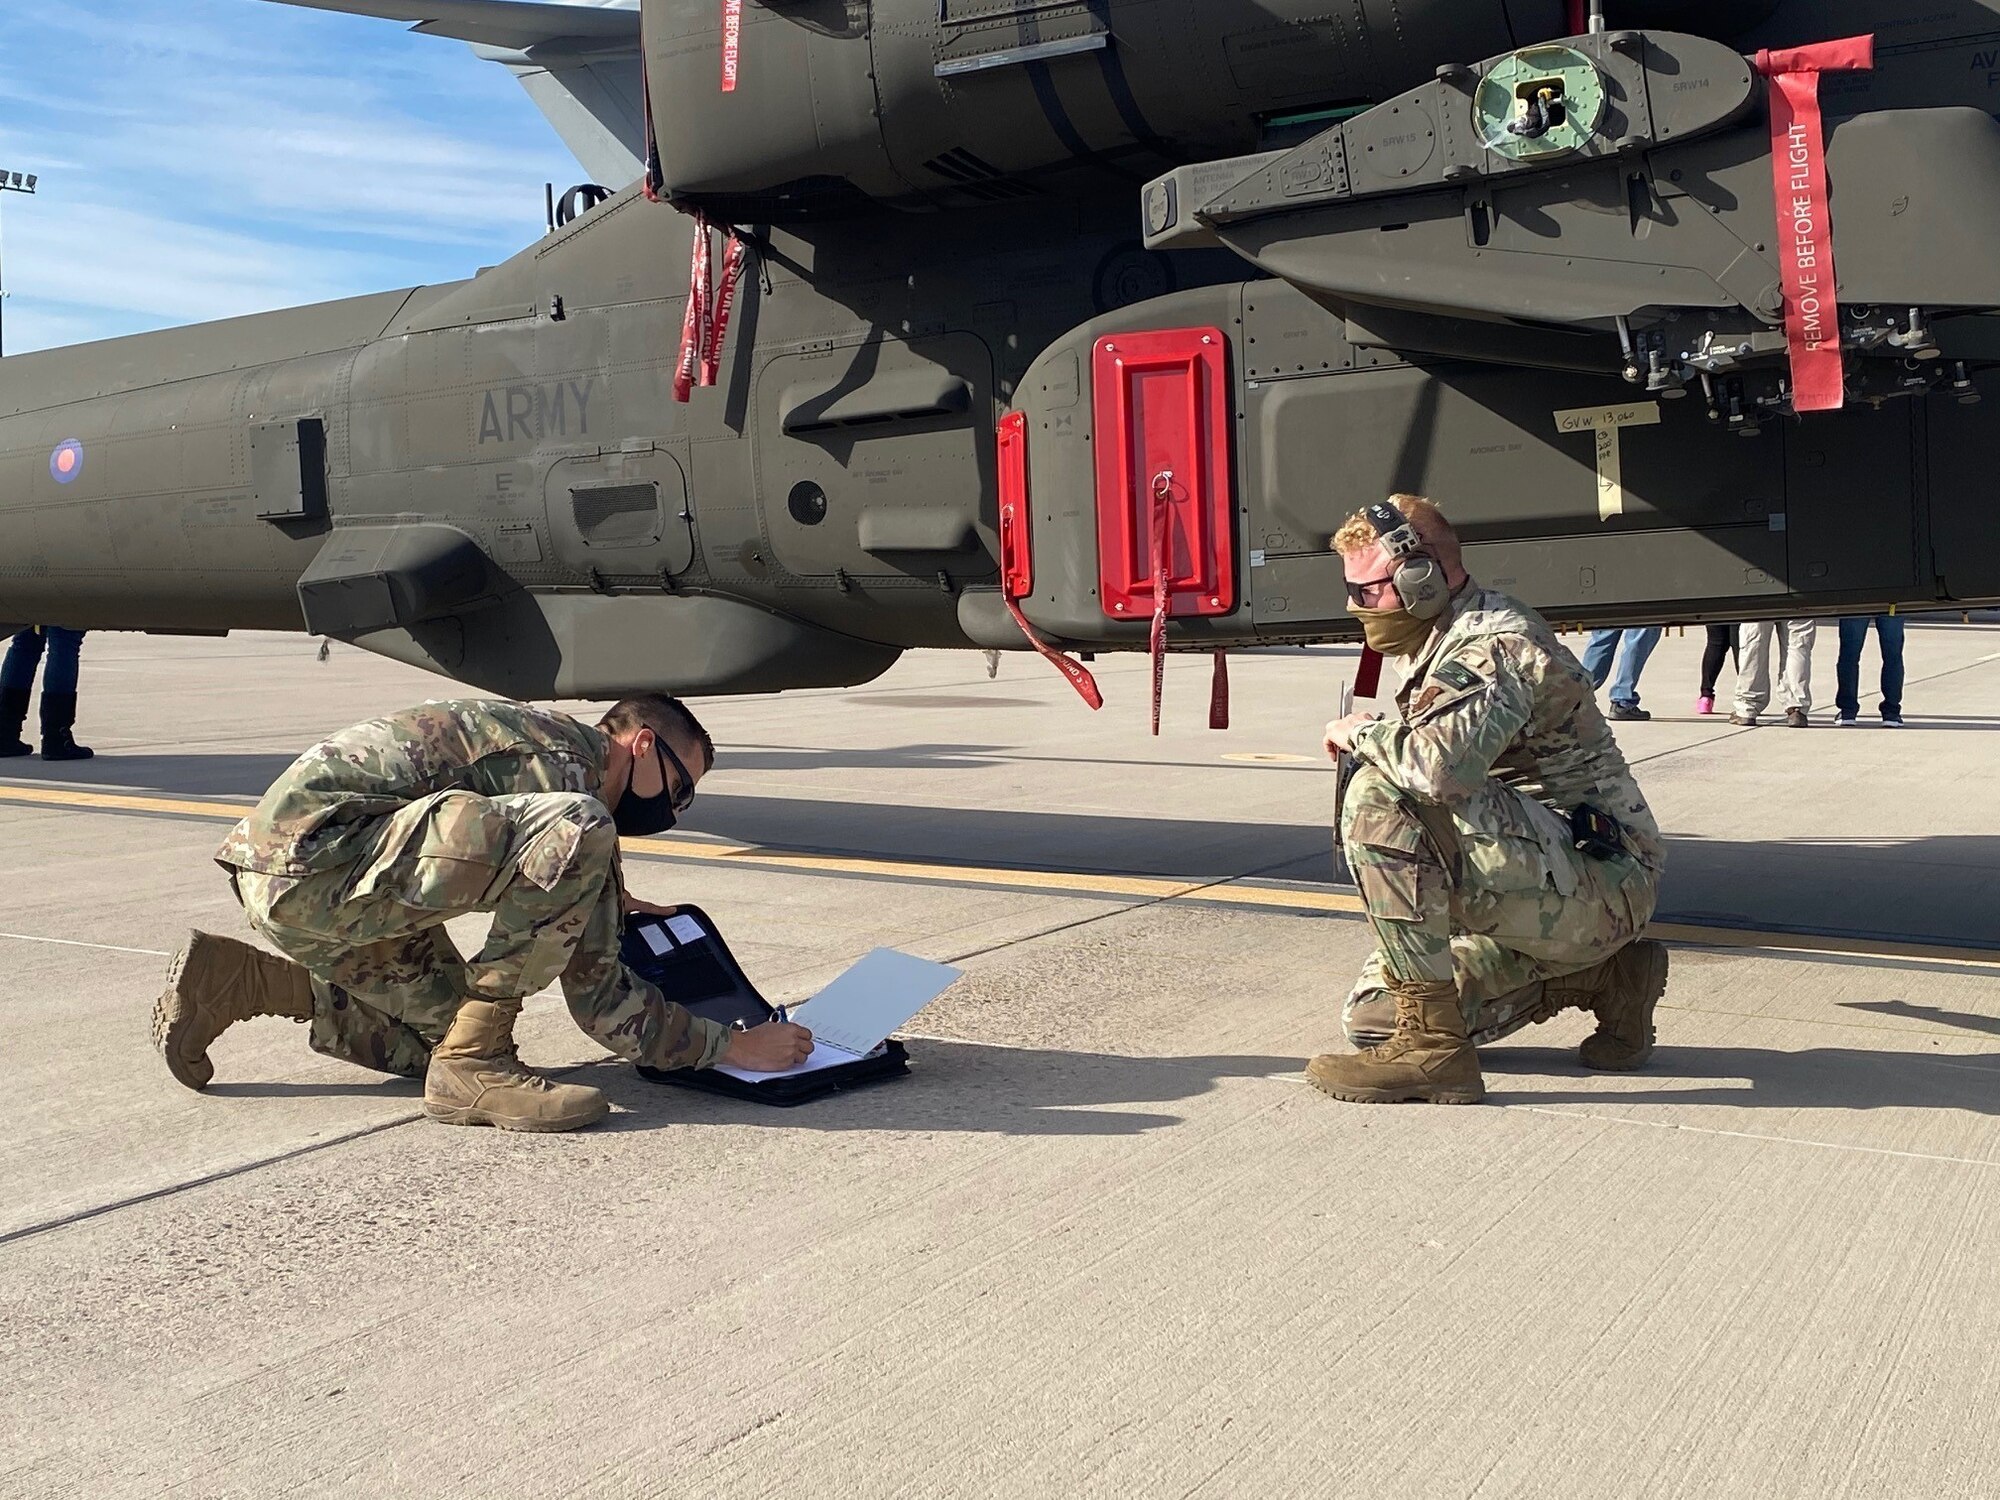 Staff Sgt. Chaz Bruno and Staff Sgt. Joe Franzen, air cargo specialists with the 161st Logistics Readiness Squadron, conduct a pre-flight inspection of an AH-64 Apache helicopter at the Goldwater Air National Guard Base in Phoenix, Arizona on Jan. 21, 2021. The 161st was contacted by the U.S. Army’s Apache foreign military sales program office to help load the attack helicopters on C-17 aircraft for shipment to the UK, due to its secure ramp space for the project, and qualified air transportation specialists who can process complex air cargo ensuring safety of flight during air transport.  (U.S. Air National Guard photo by 2nd Lt. Wes Parrell)